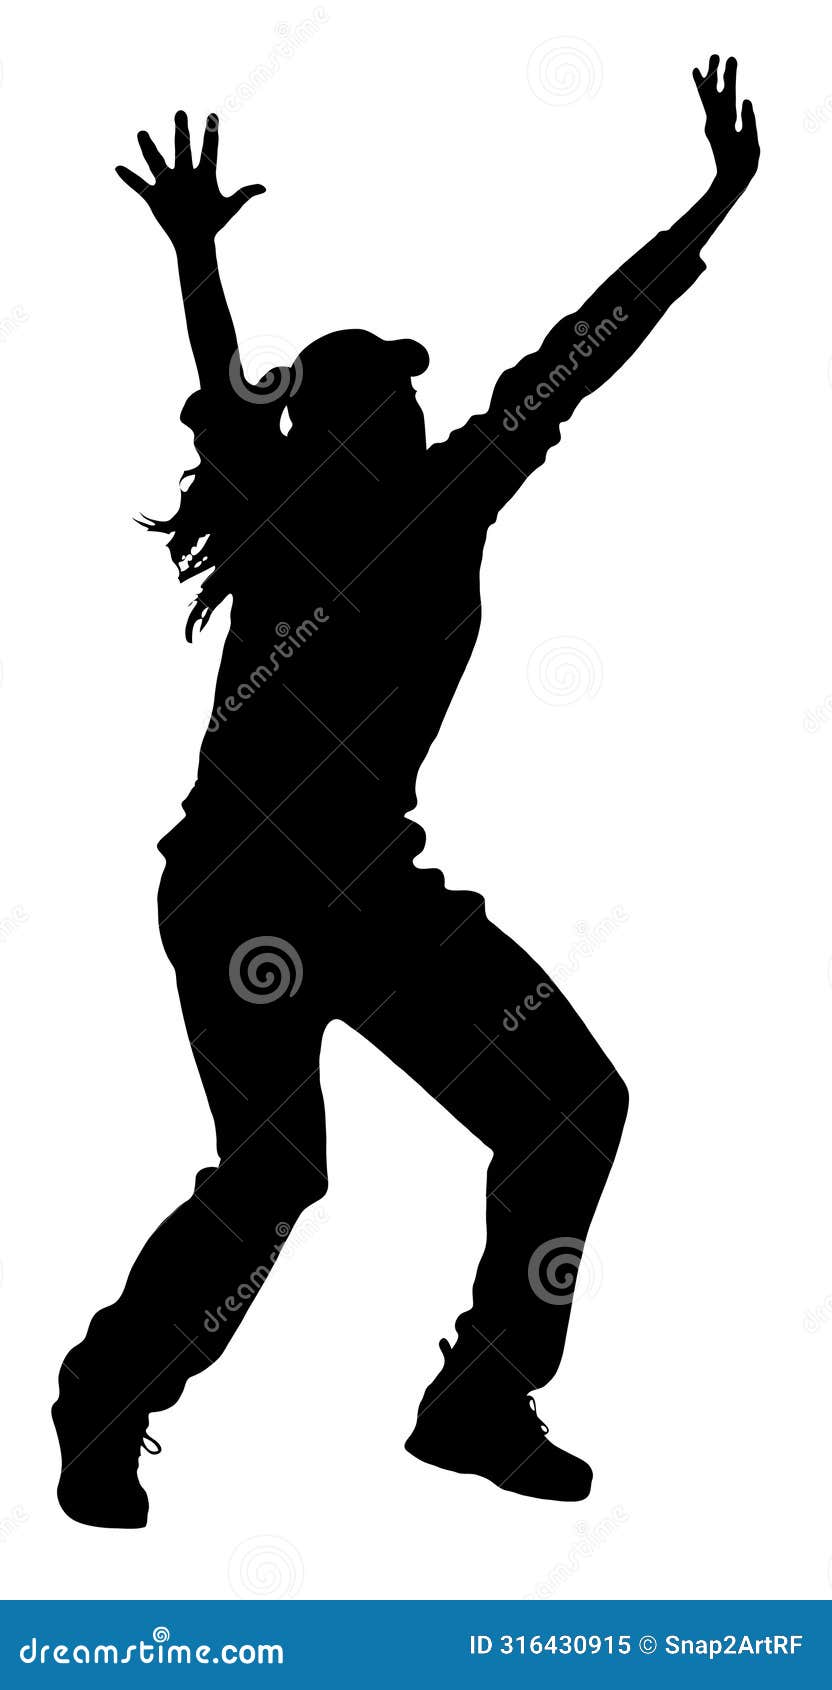 detailed sport silhouette - woman or female cricket bowler appealing for lbw